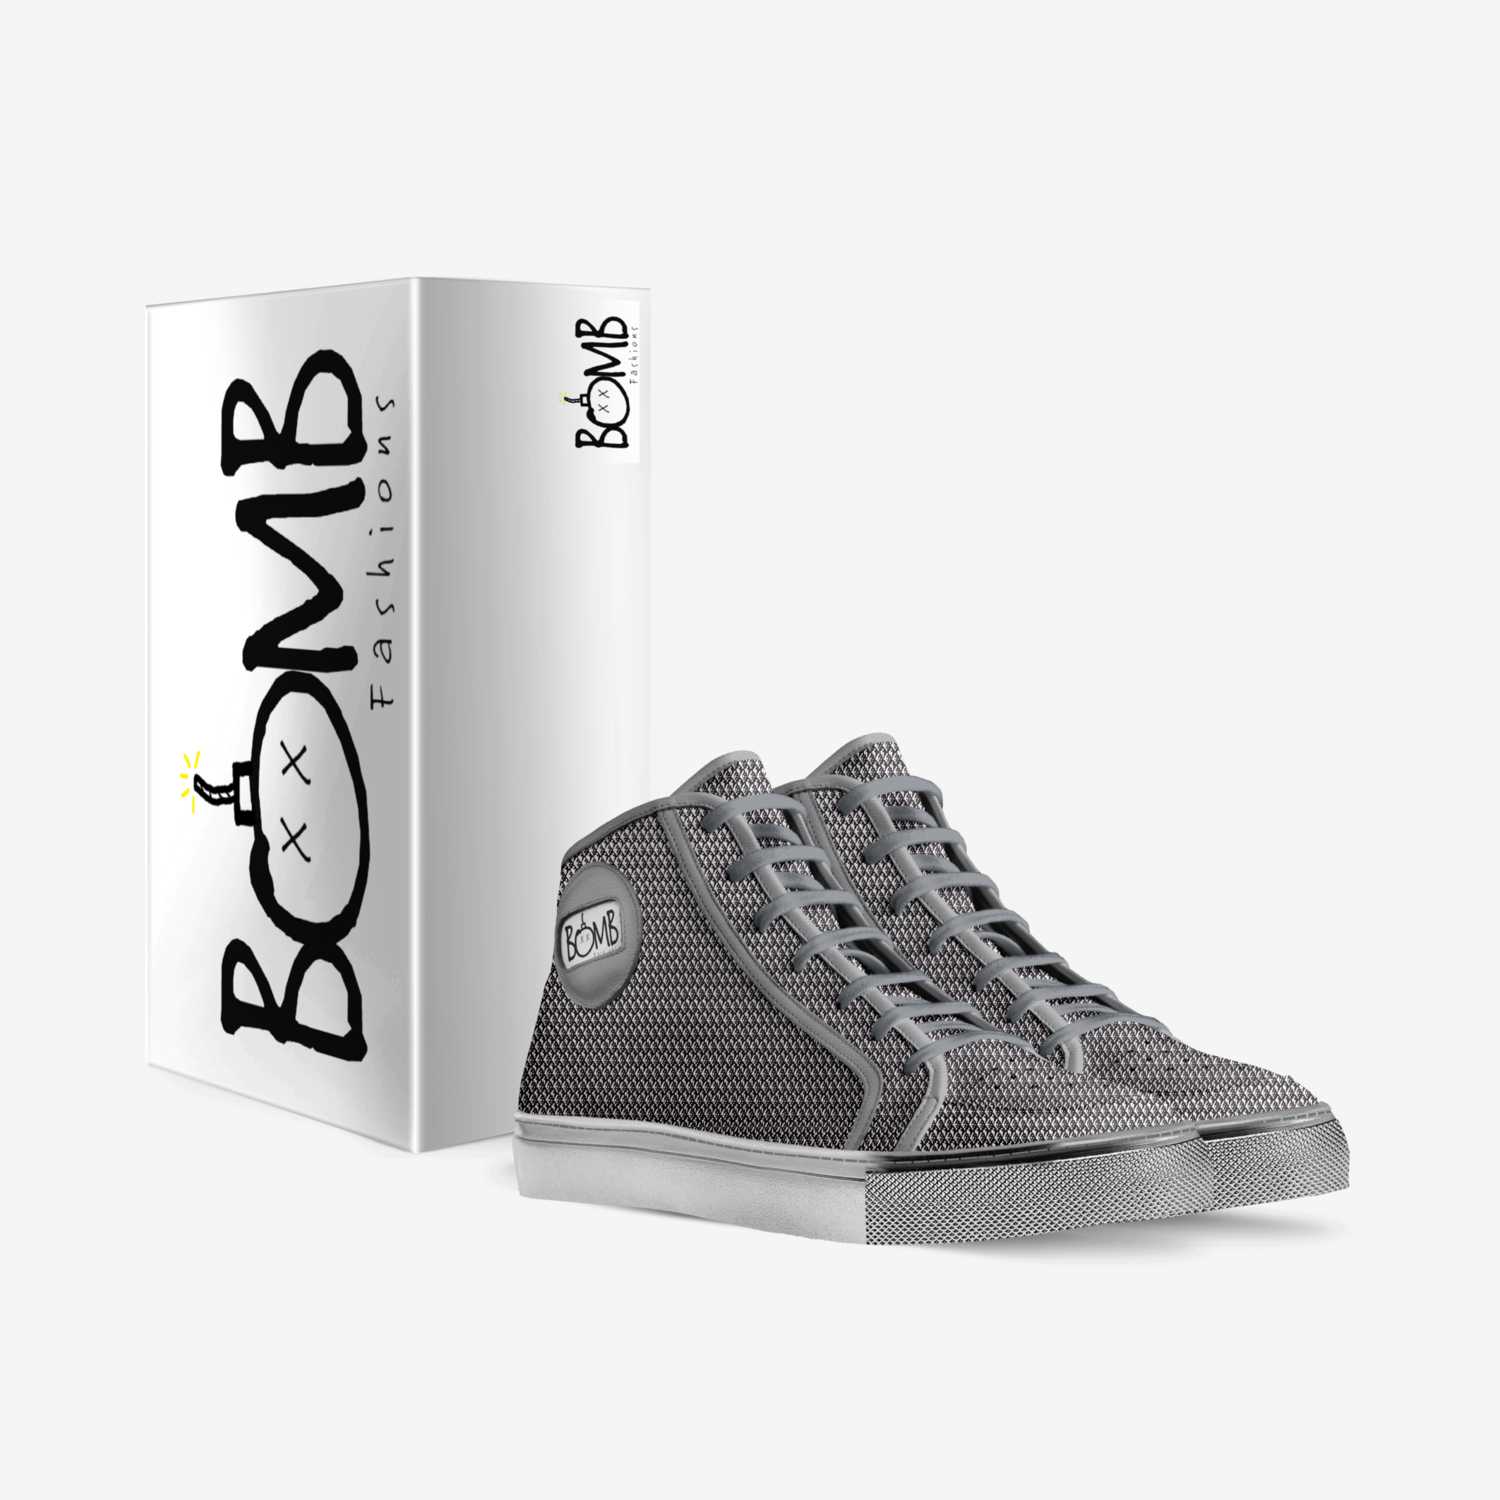 BOMB Fashions custom made in Italy shoes by Solus Jones | Box view